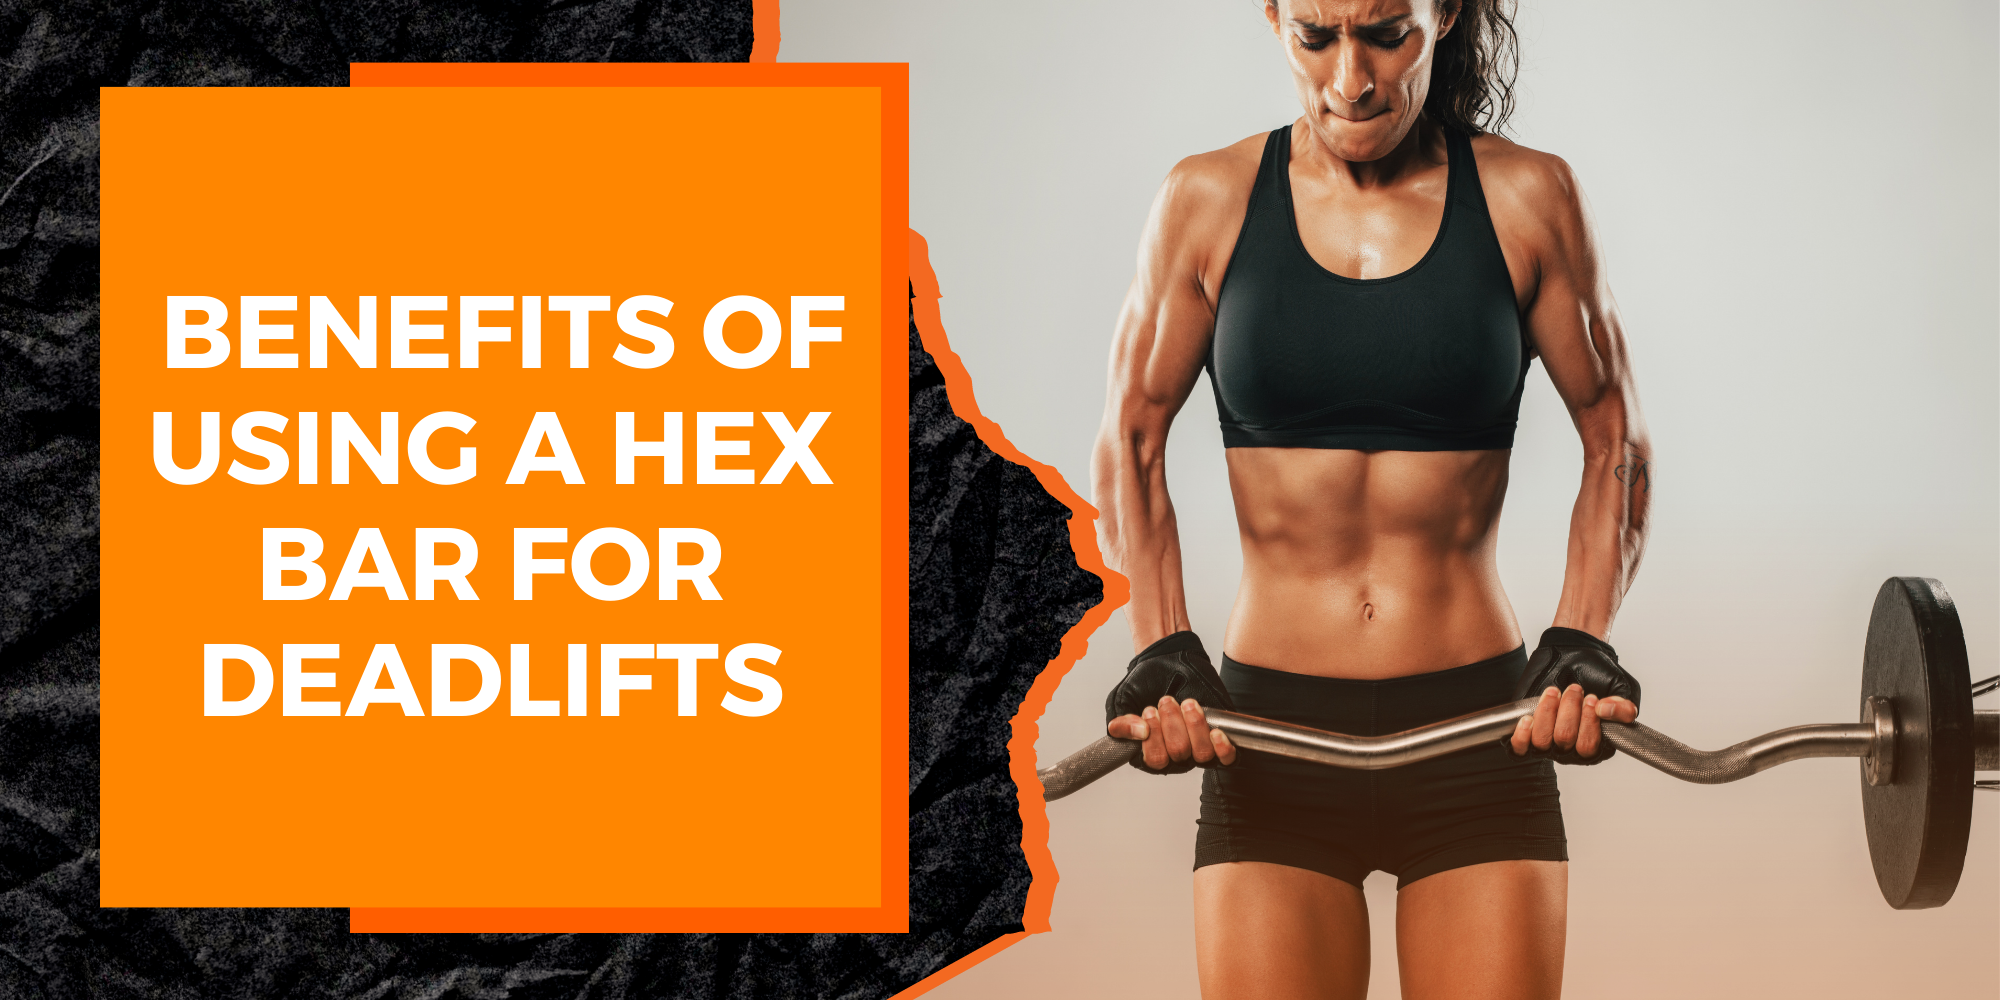 The Benefits of Using a Hex Bar for Deadlifts